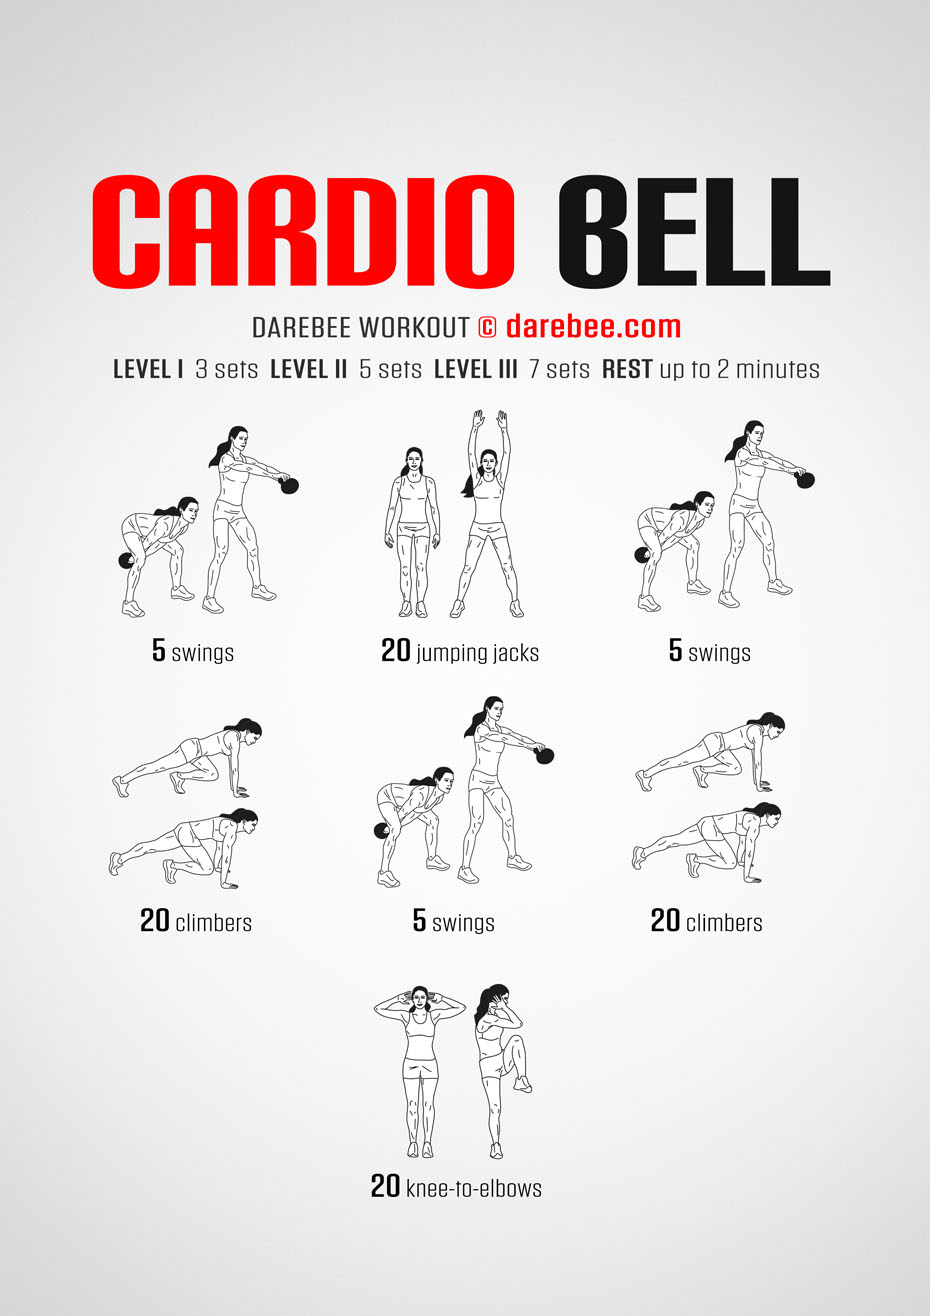 Cardio Bell is a Darebee home fitness workout that helps you use your kettlebell creatively so you get both a functional strength and cardio workout in one.